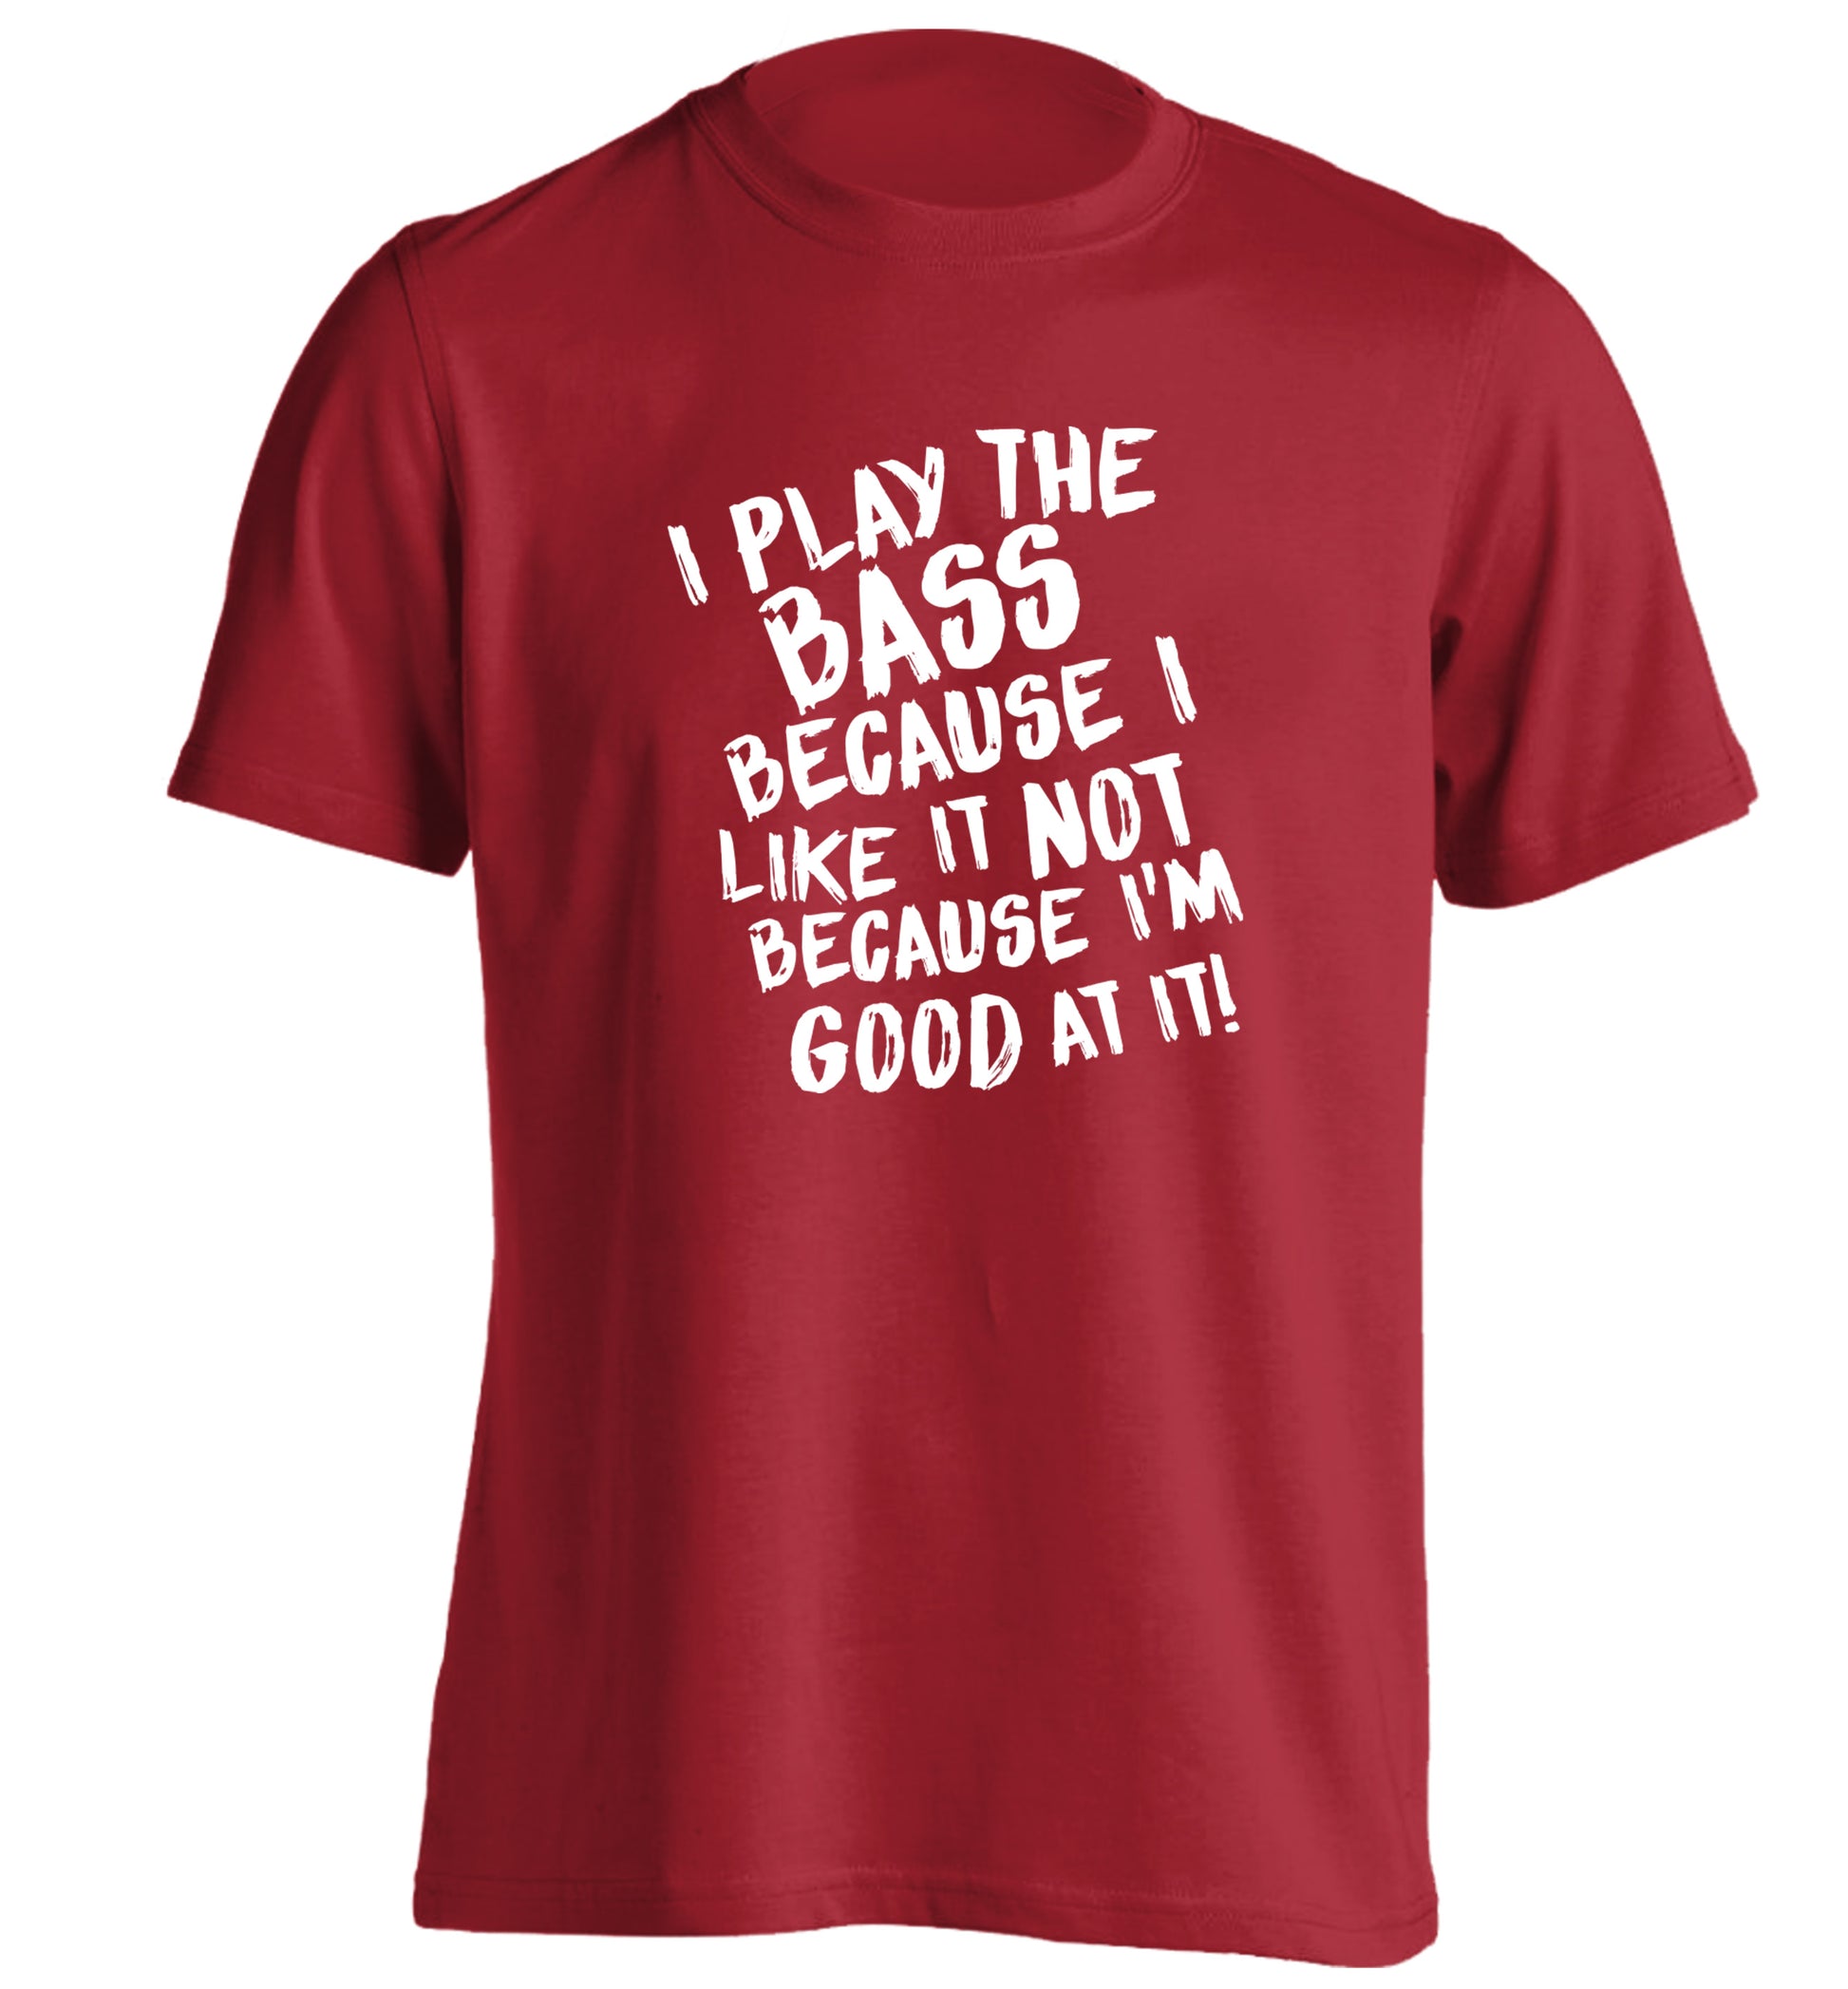 I play the bass because I like it not because I'm good at it adults unisex red Tshirt 2XL